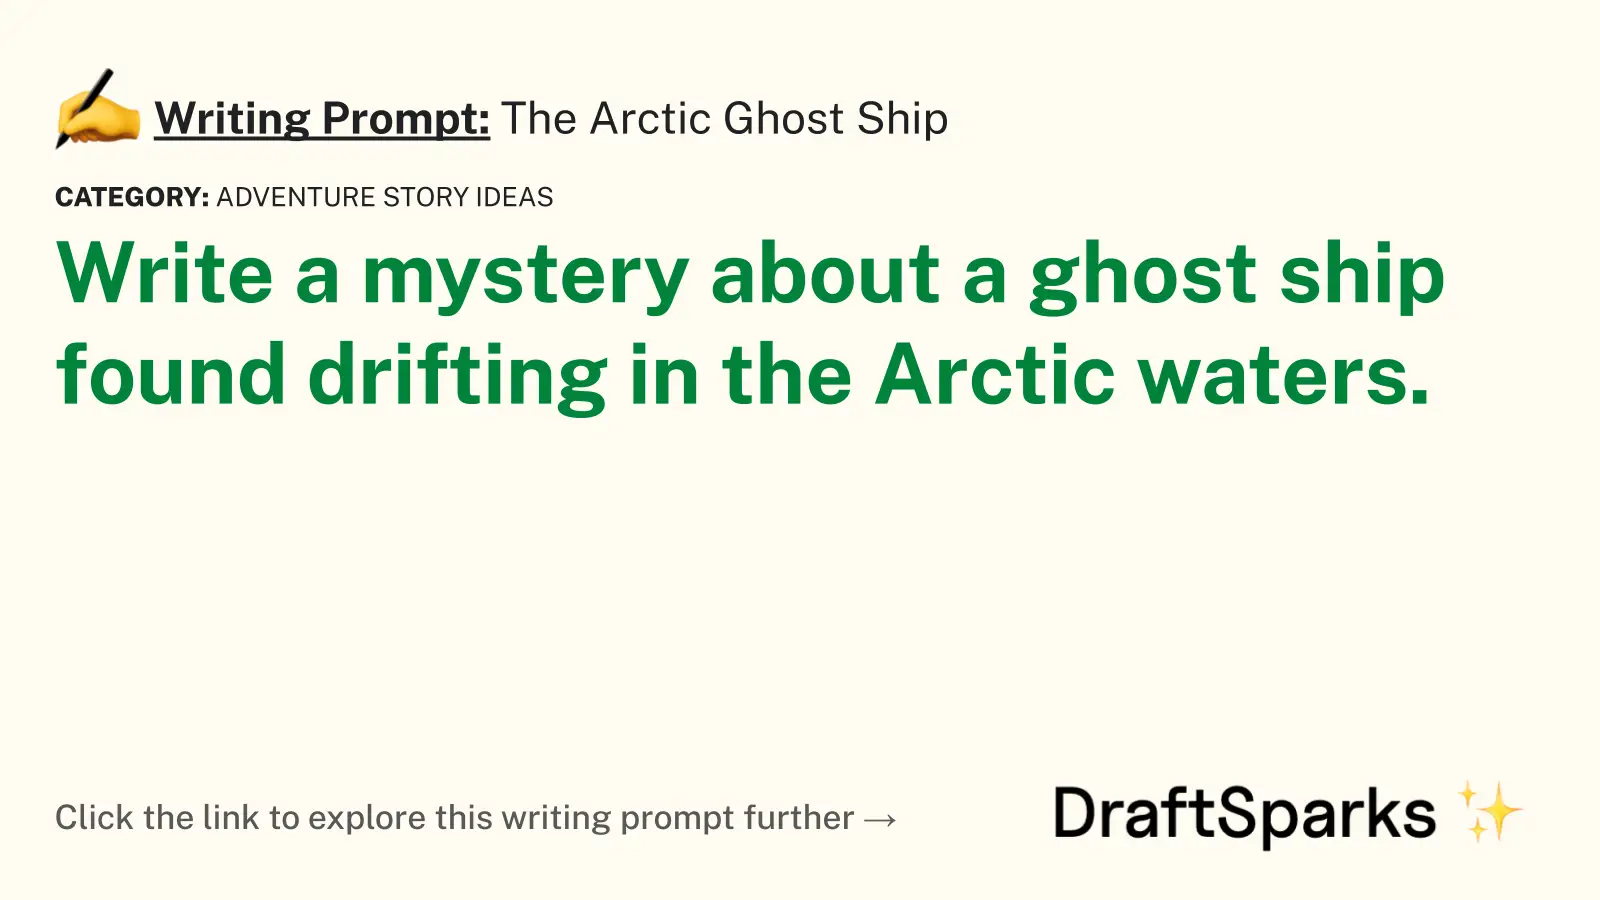 The Arctic Ghost Ship